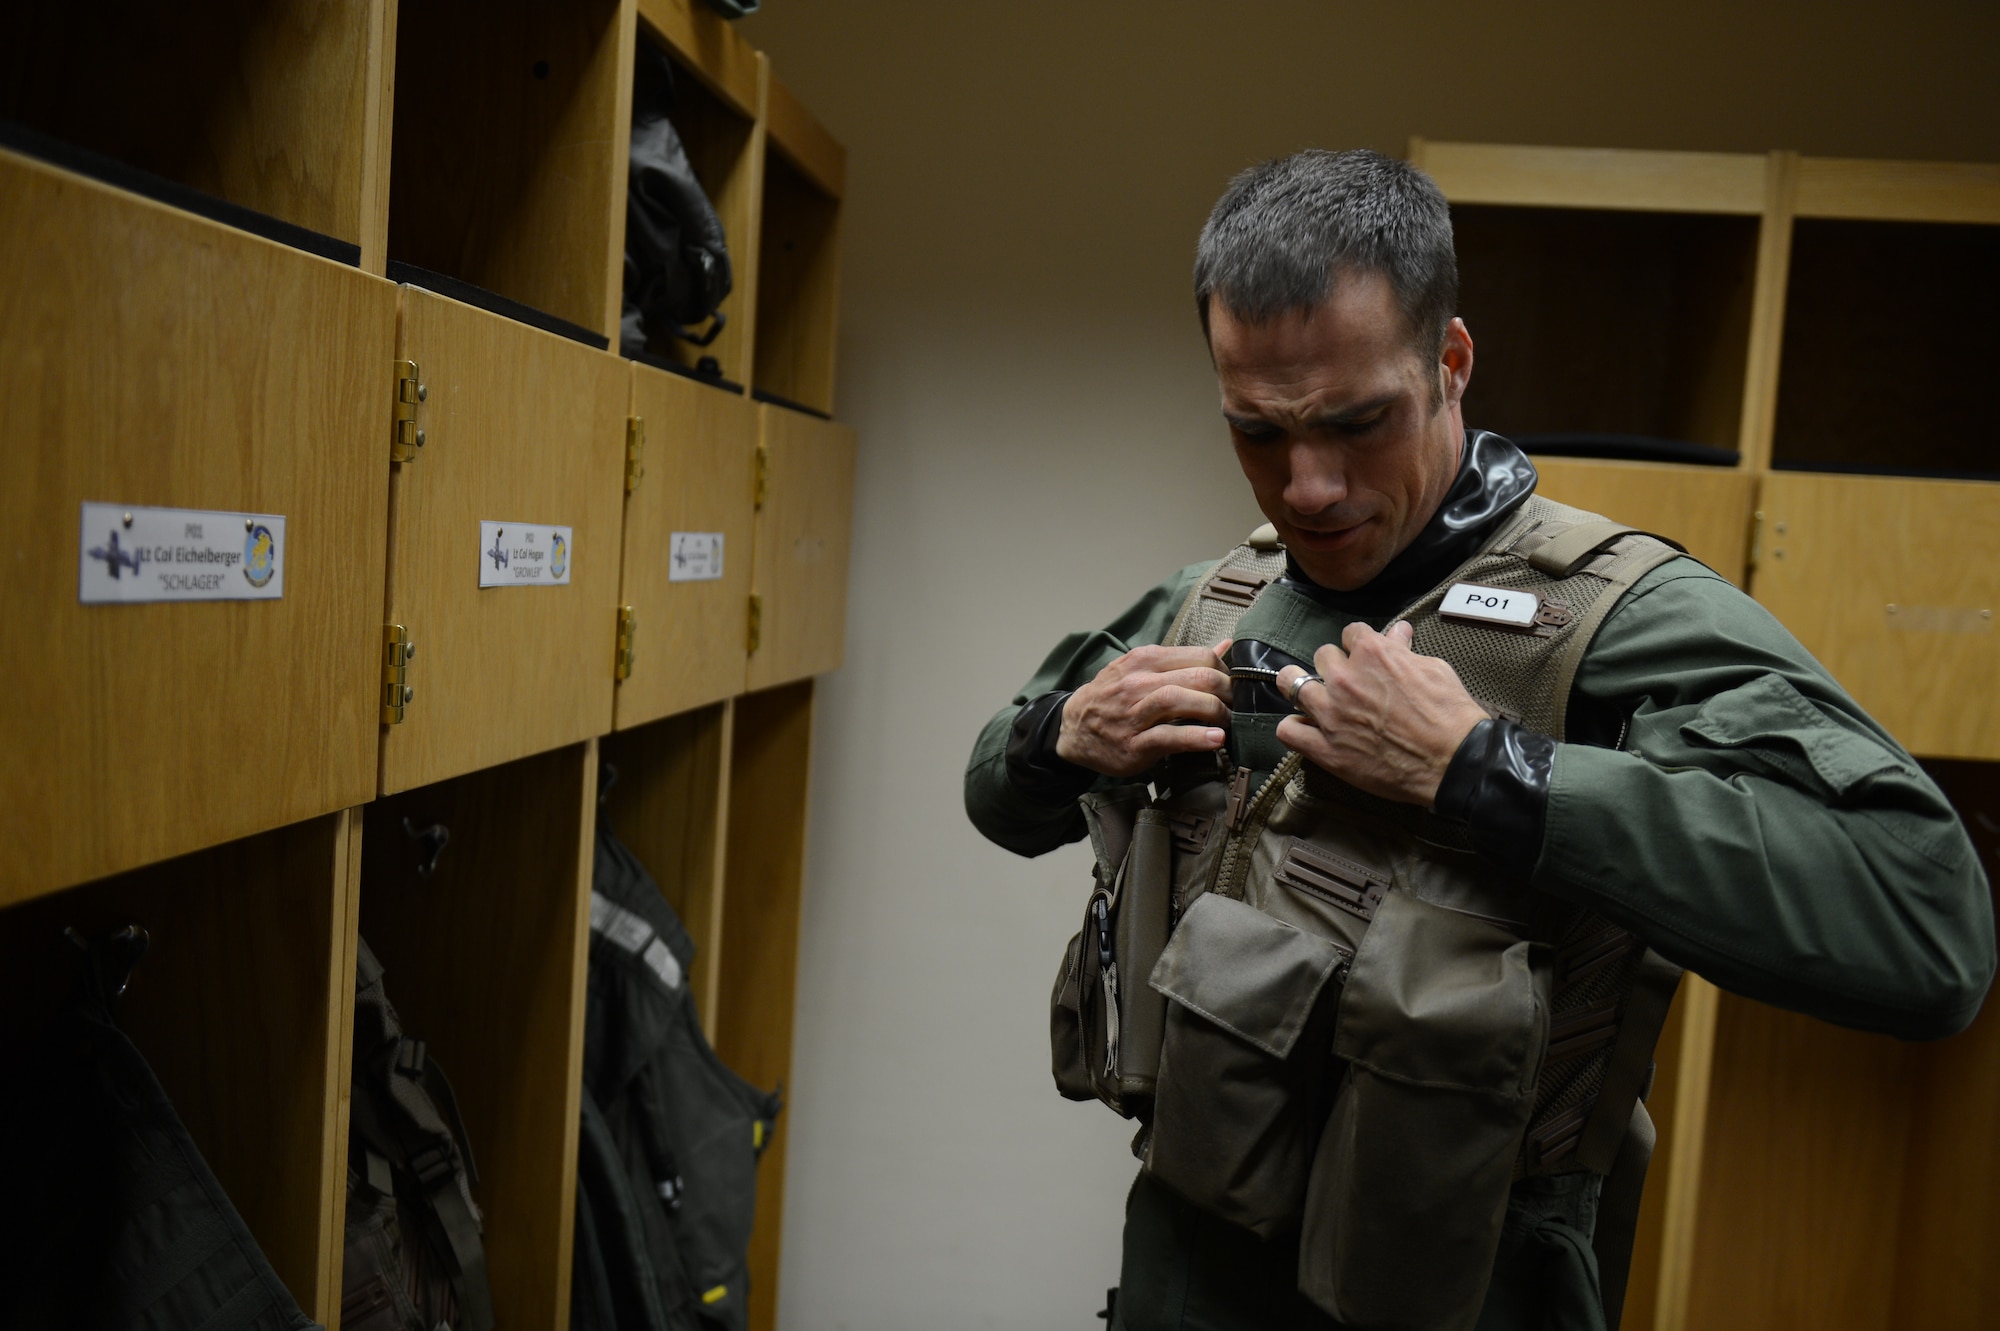 SPANGDAHLEM AIR BASE, Germany – U.S. Air Force Lt. Col. Clinton Eichelberger, 81st Fighter Squadron commander, gears up before departing in a U.S. Air Force A-10 Thunderbolt II attack aircraft May 17, 2013. Eichelberger was the lead pilot for the final four A-10 flight to leave Europe from Spangdahlem Air Base. (U.S. Air Force photo by Airman 1st Class Gustavo Castillo/Released)